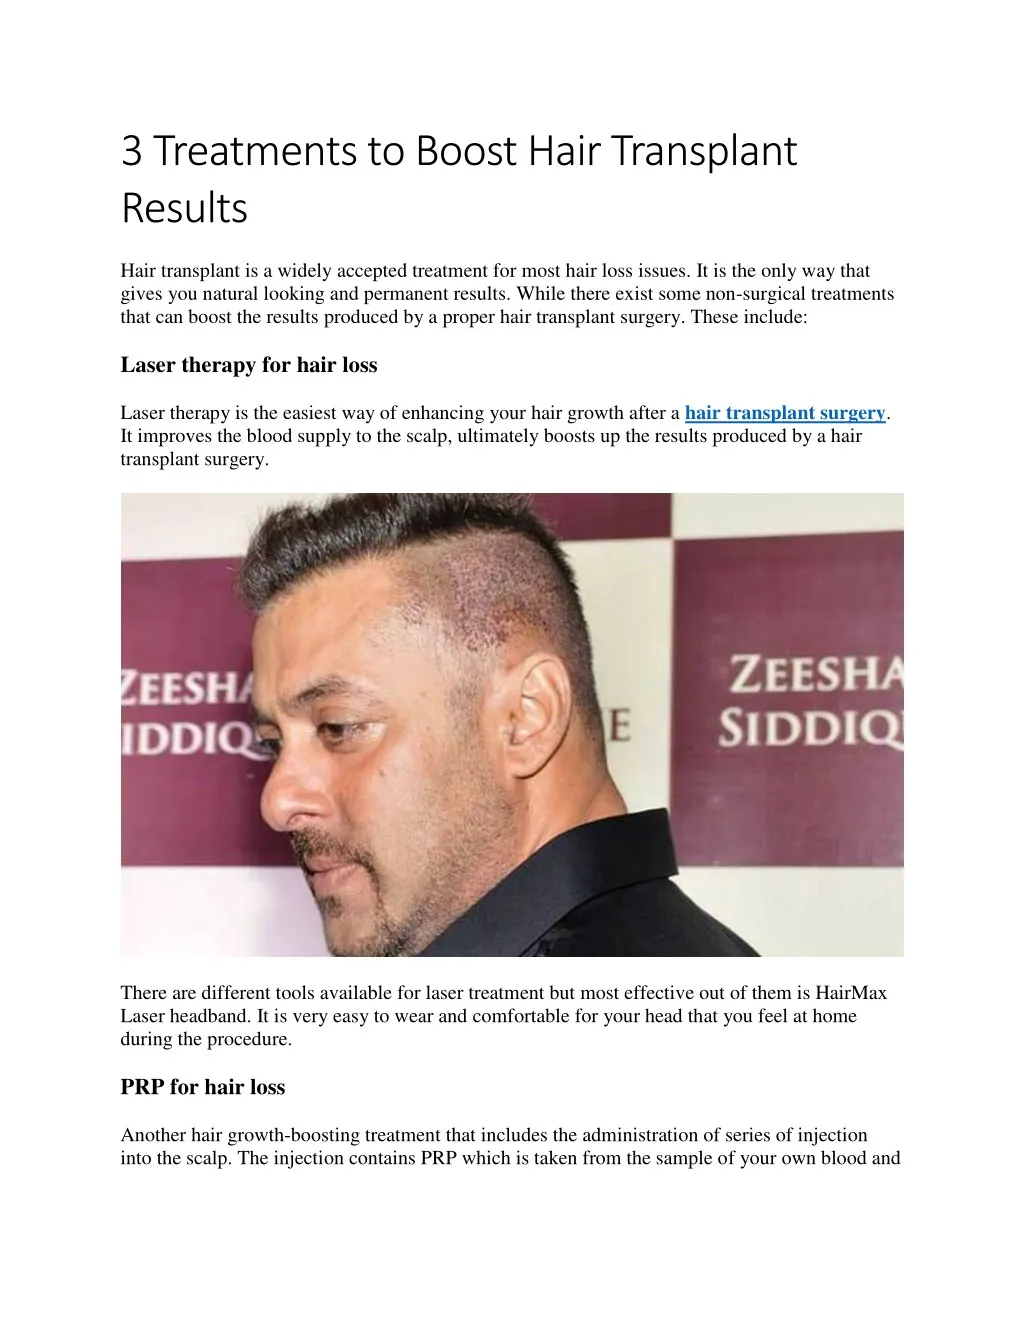 3 treatments to boost hair transplant results